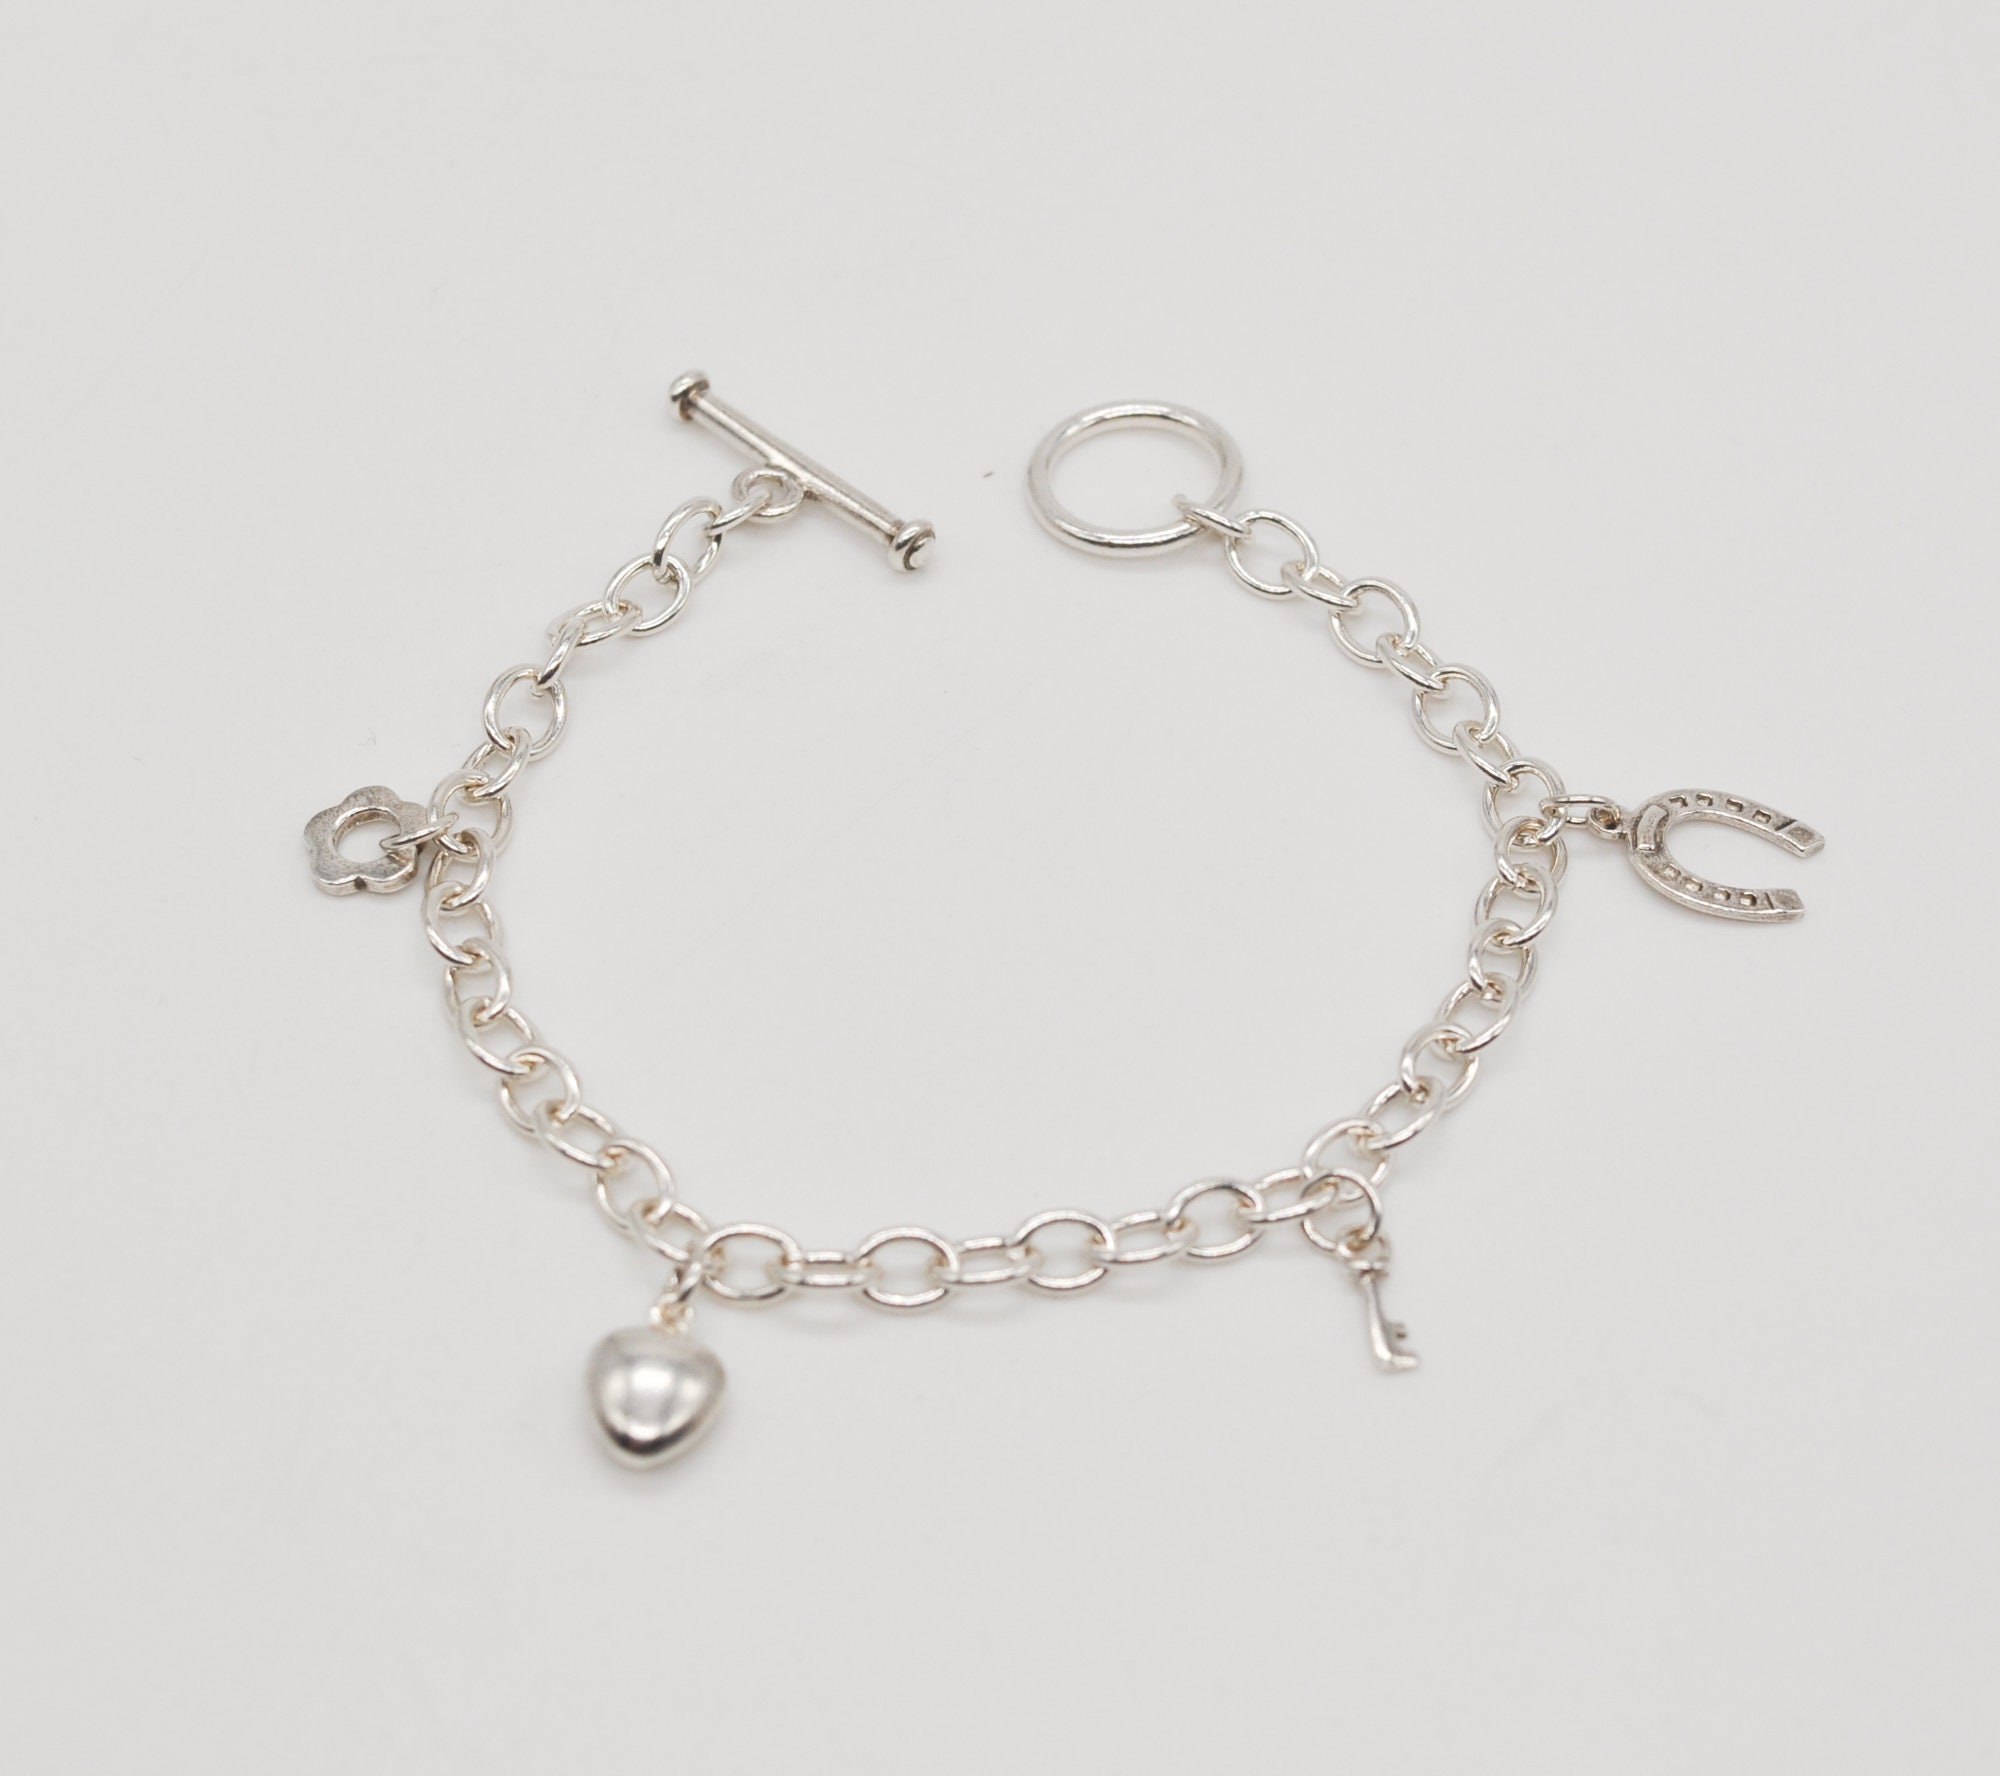 Vintage 925 Sterling Silver Anchor Bracelet with Charms. Length: 18.5 cm / 7.2 inch.